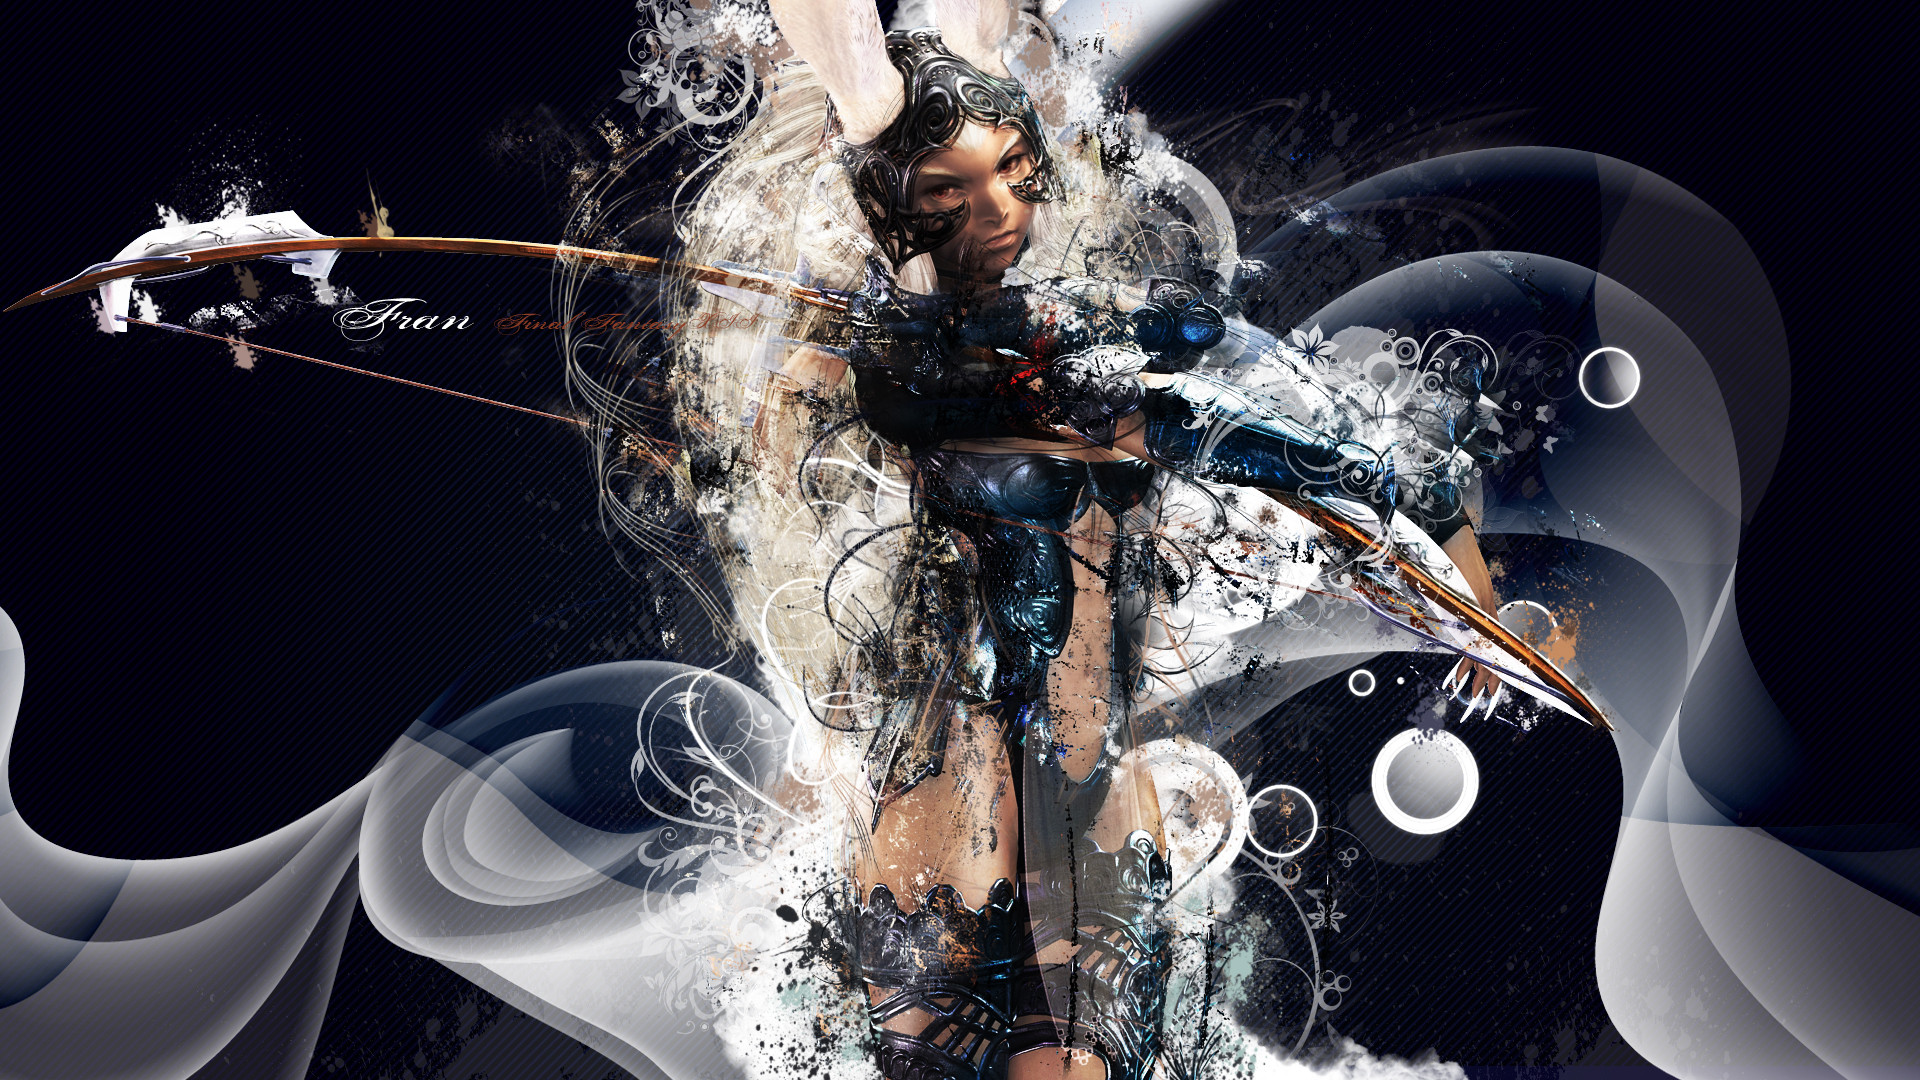 Video Game Final Fantasy XII HD Wallpaper | Background Image